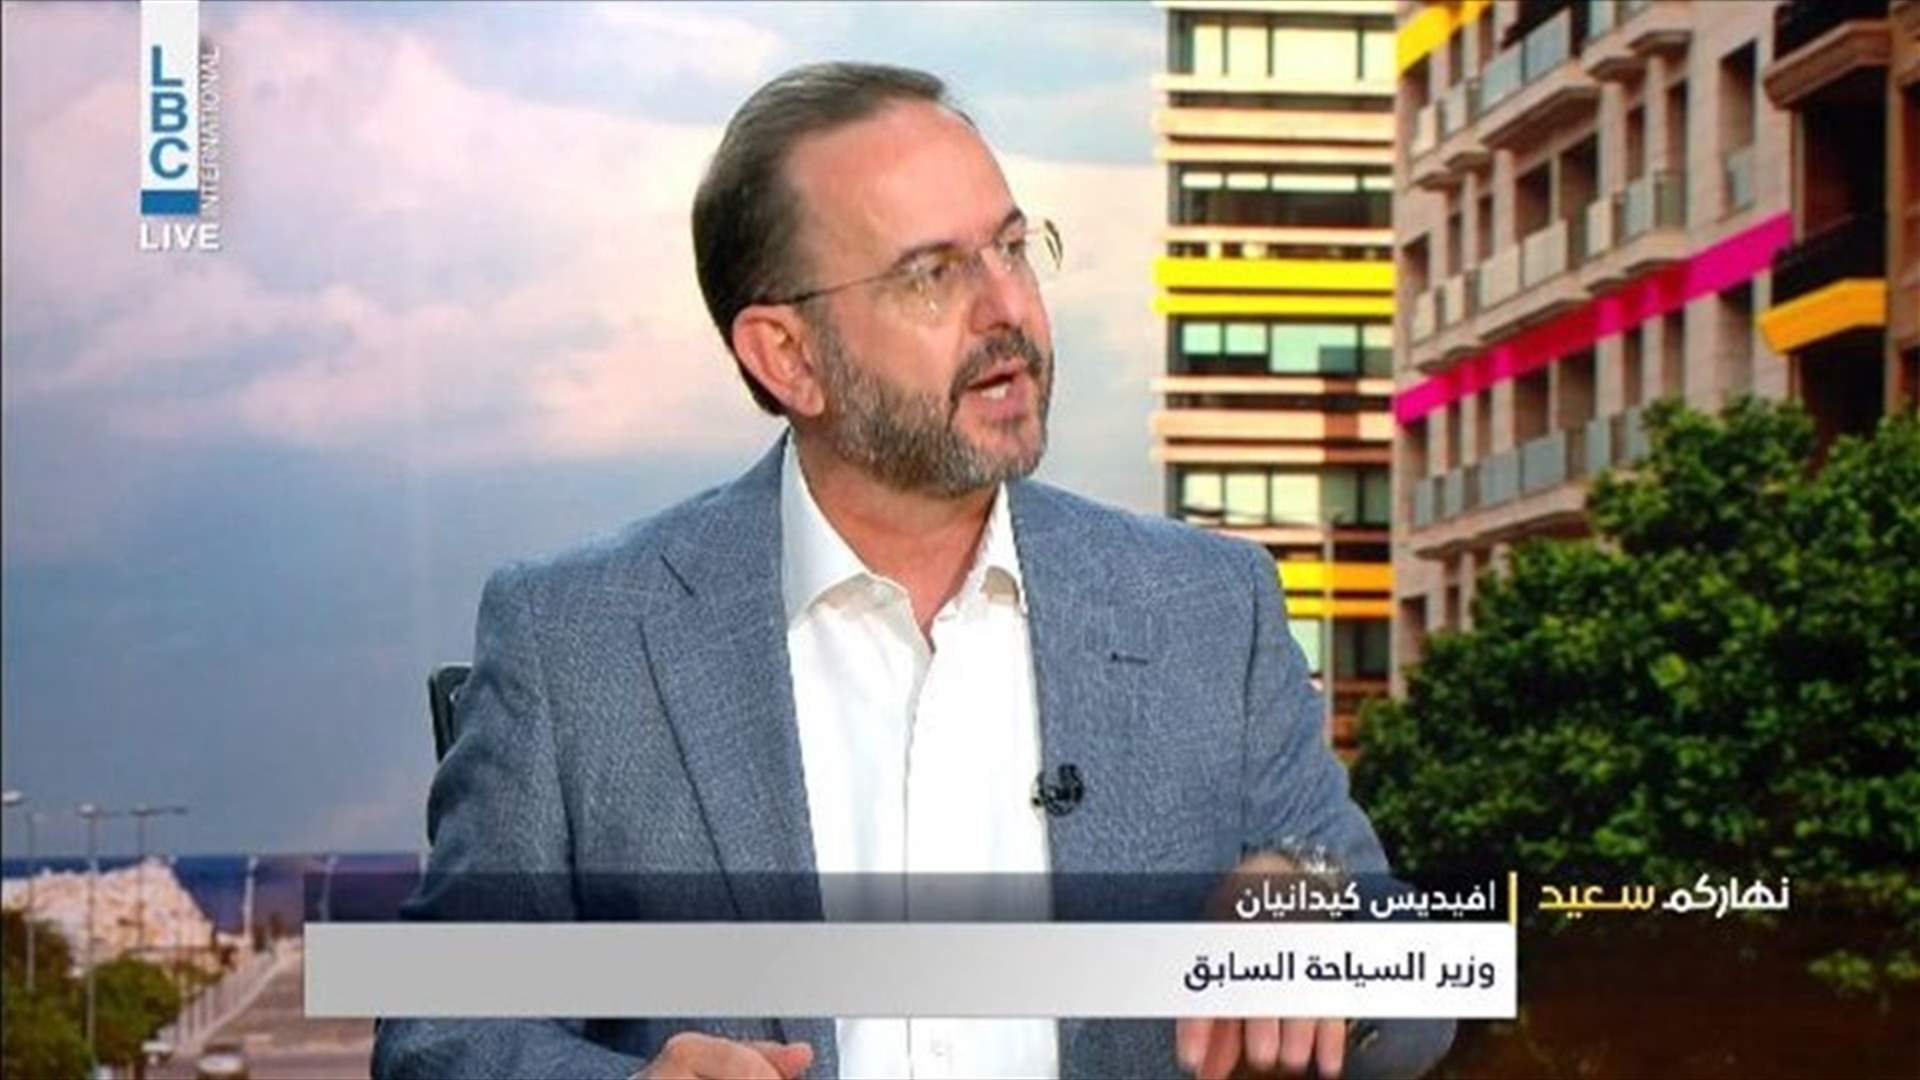 Guidanian to LBCI: We should benefit from deterioration of Lebanese pound to promote tourism